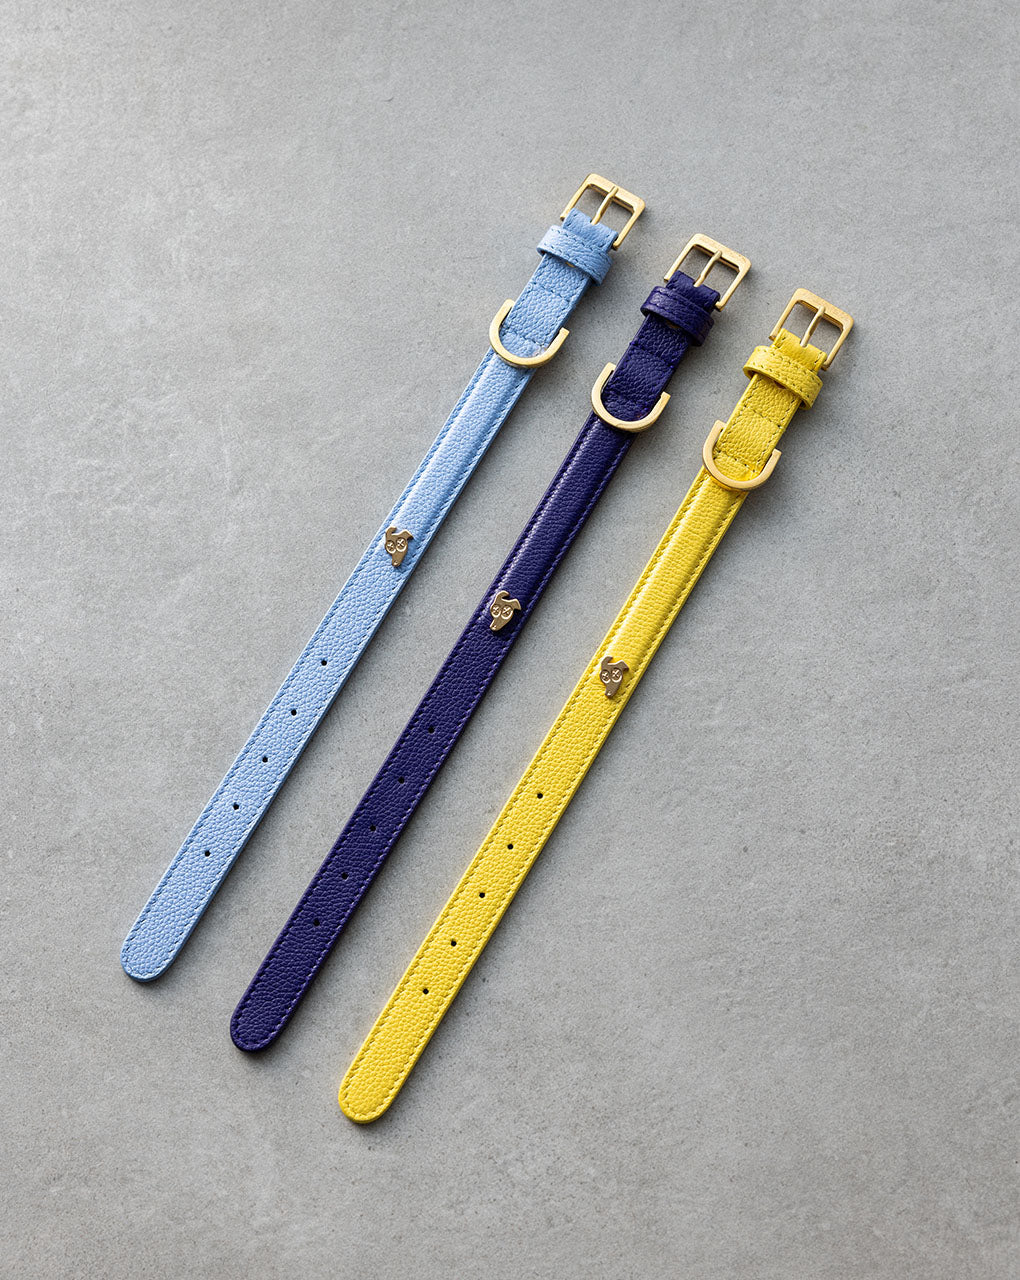 Three regular sized dog collars lined-up next to each other on a concrete background. The colours shown are ‘Ciel’ (light bleu), ‘Eggplant’ (deep purple) and ‘Lemon Squeeze’ (bright yellow). 